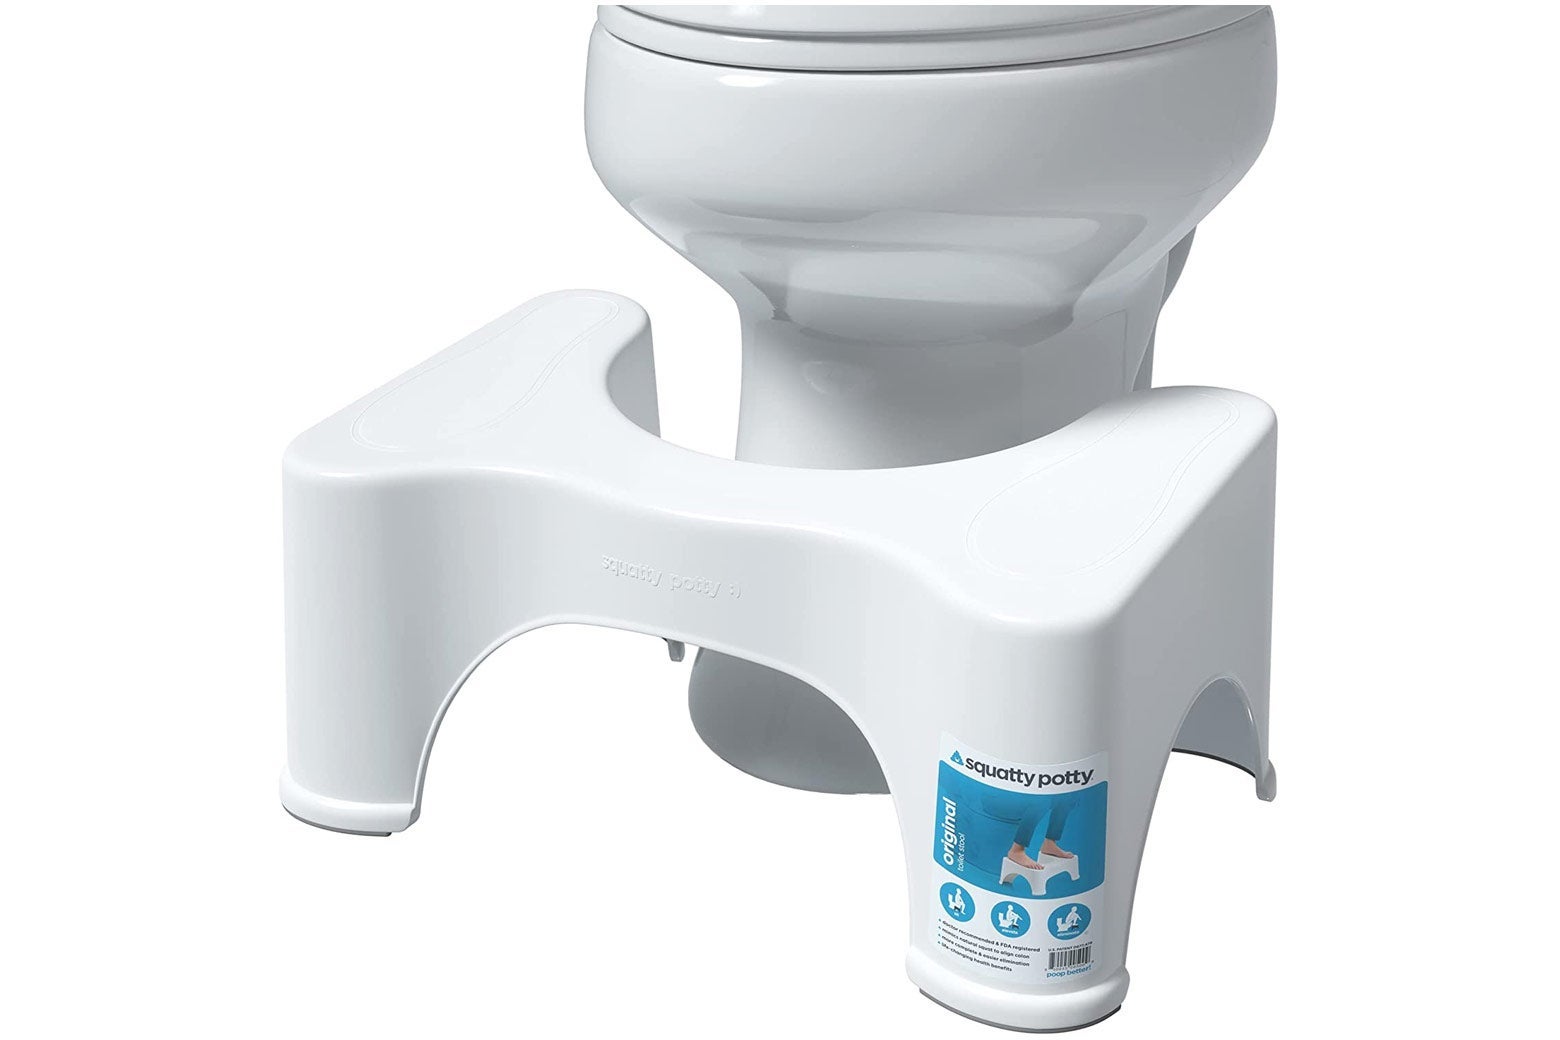 Low stool in front of a toilet